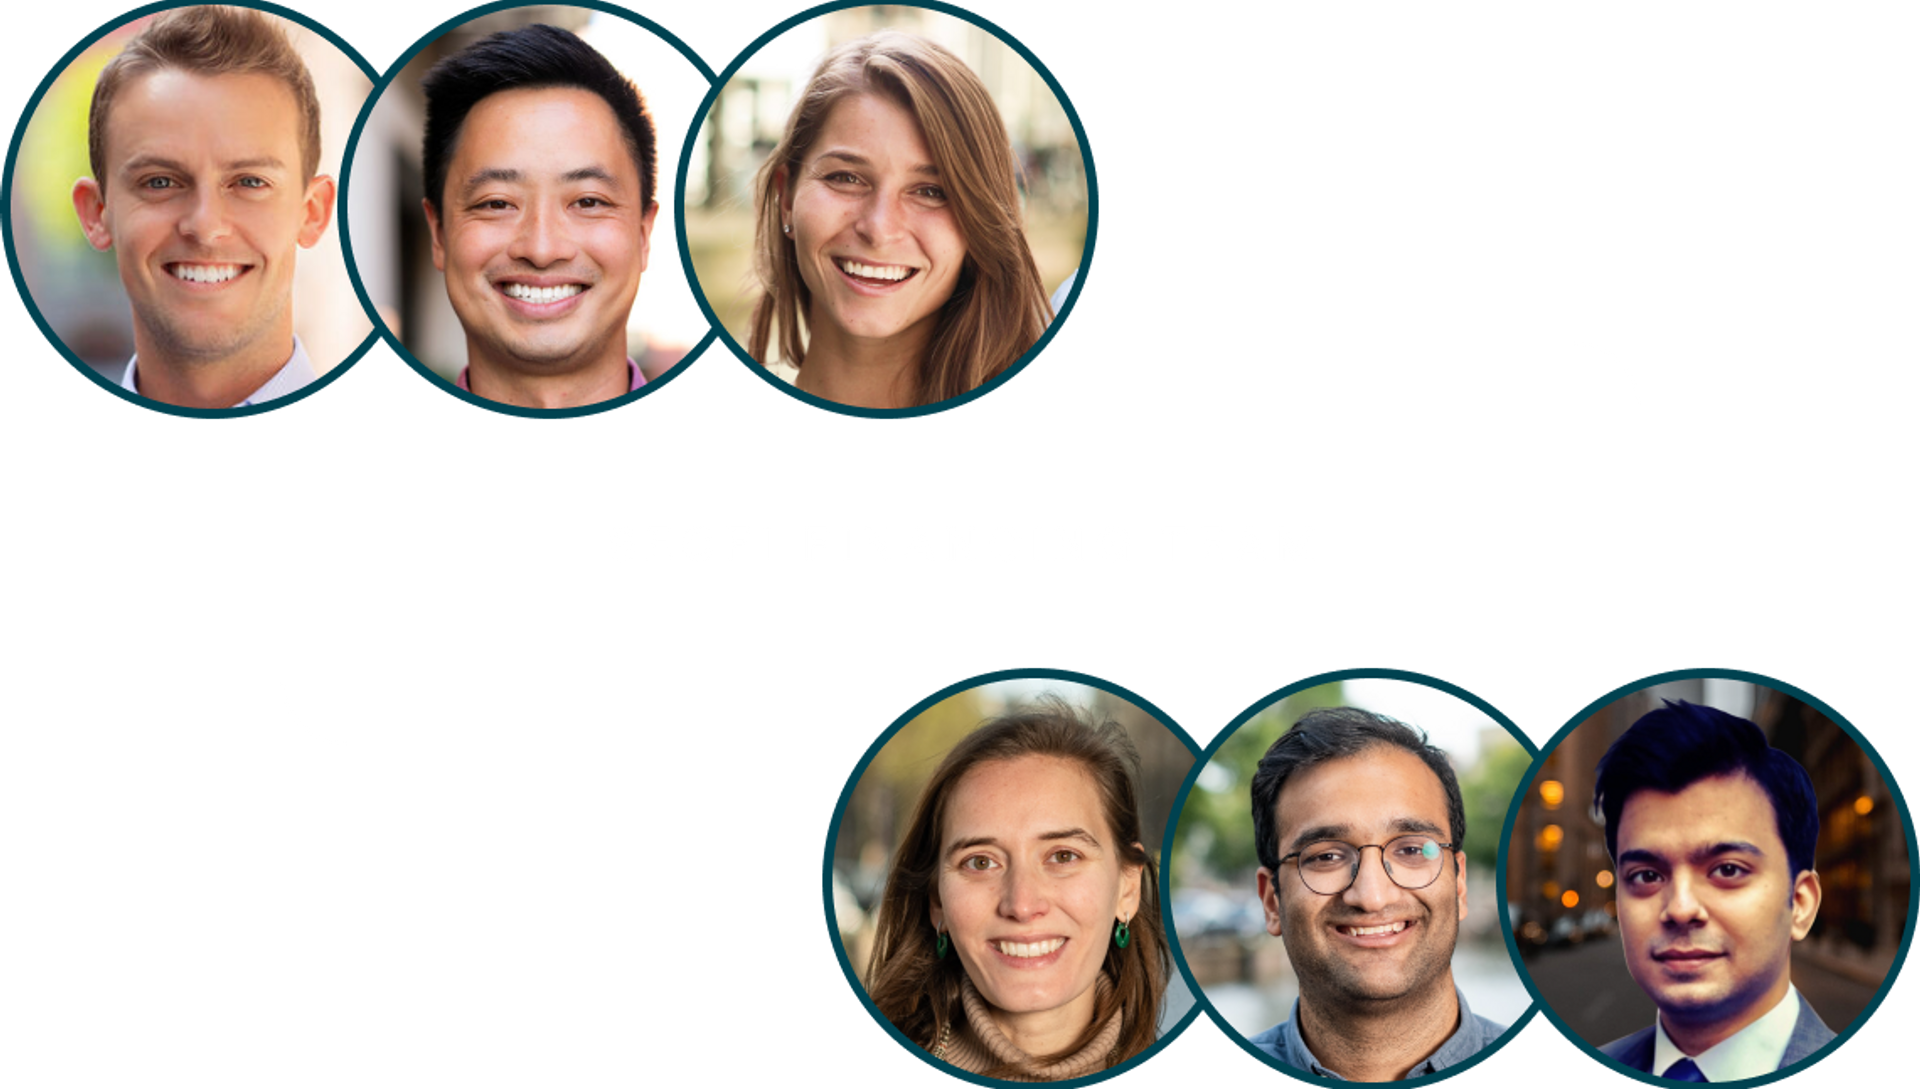 Pictures of 6 financing team members